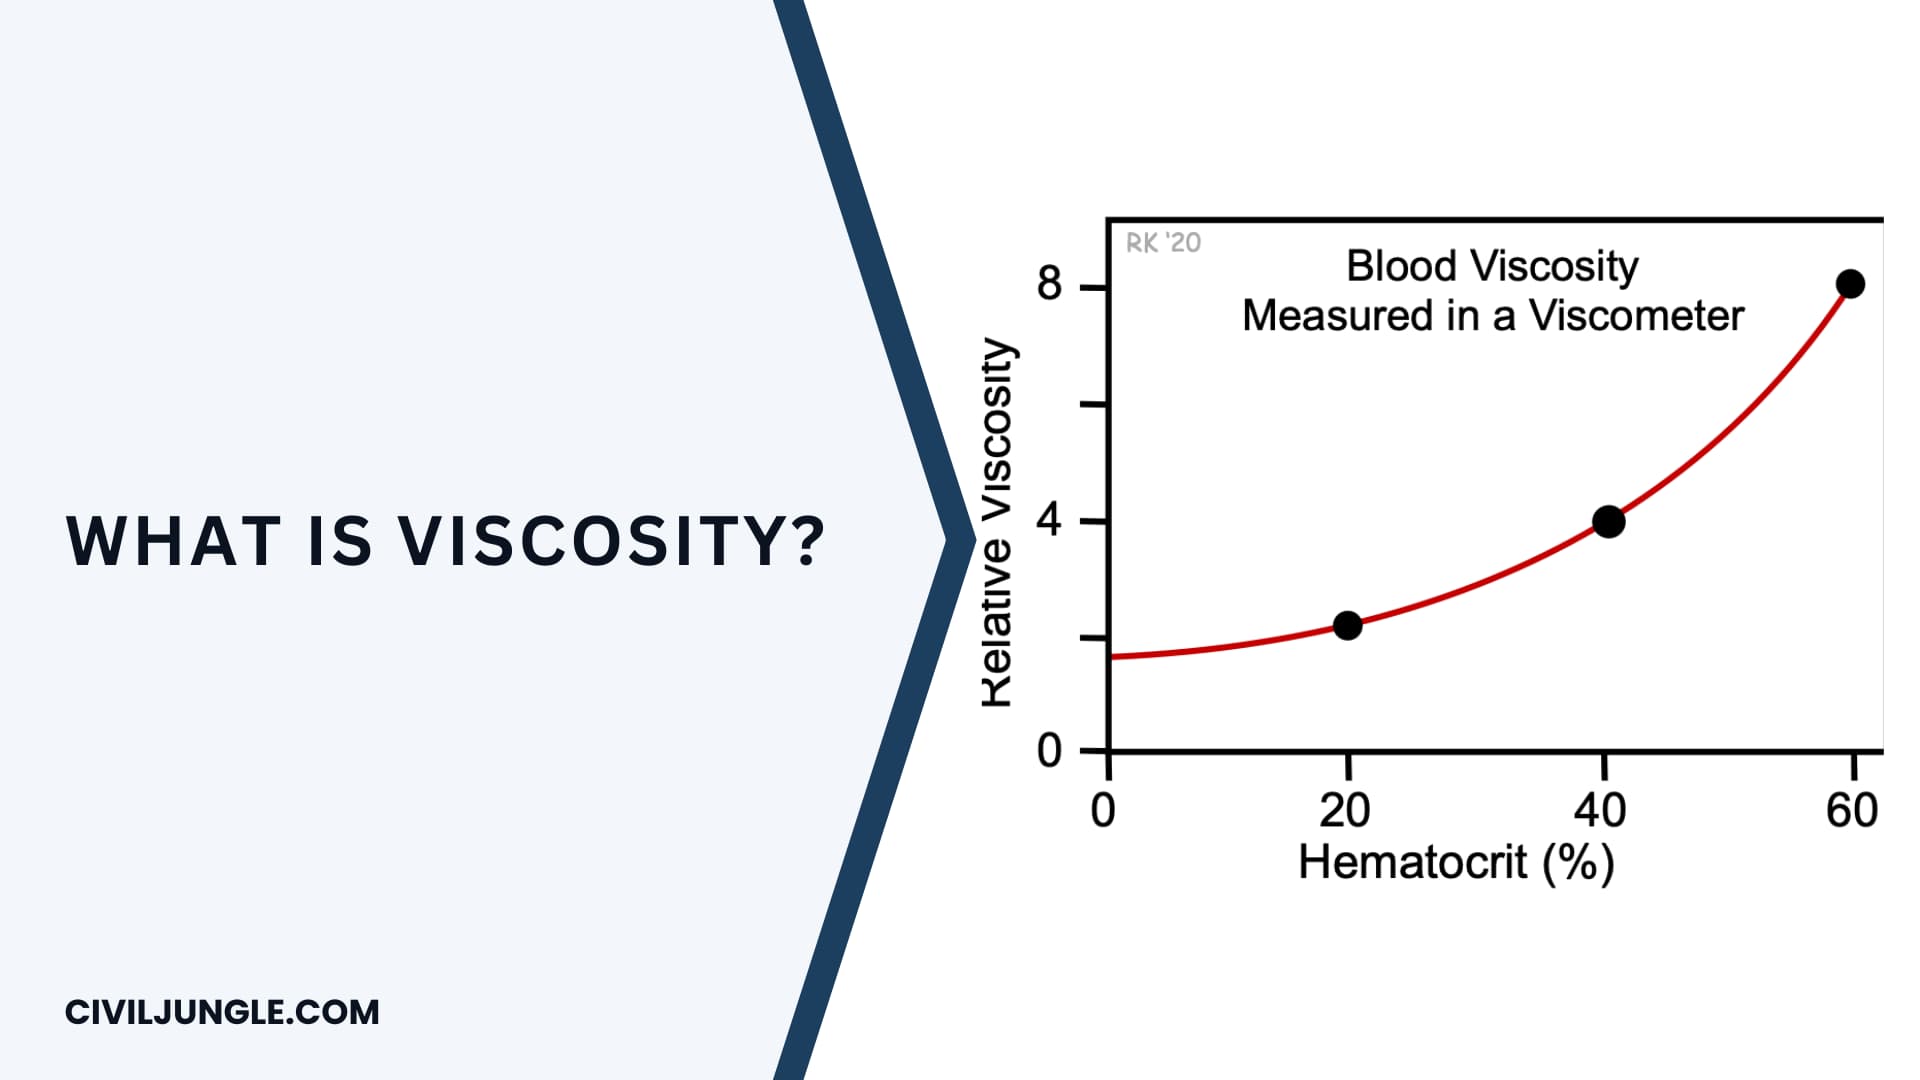 What Is Viscosity?